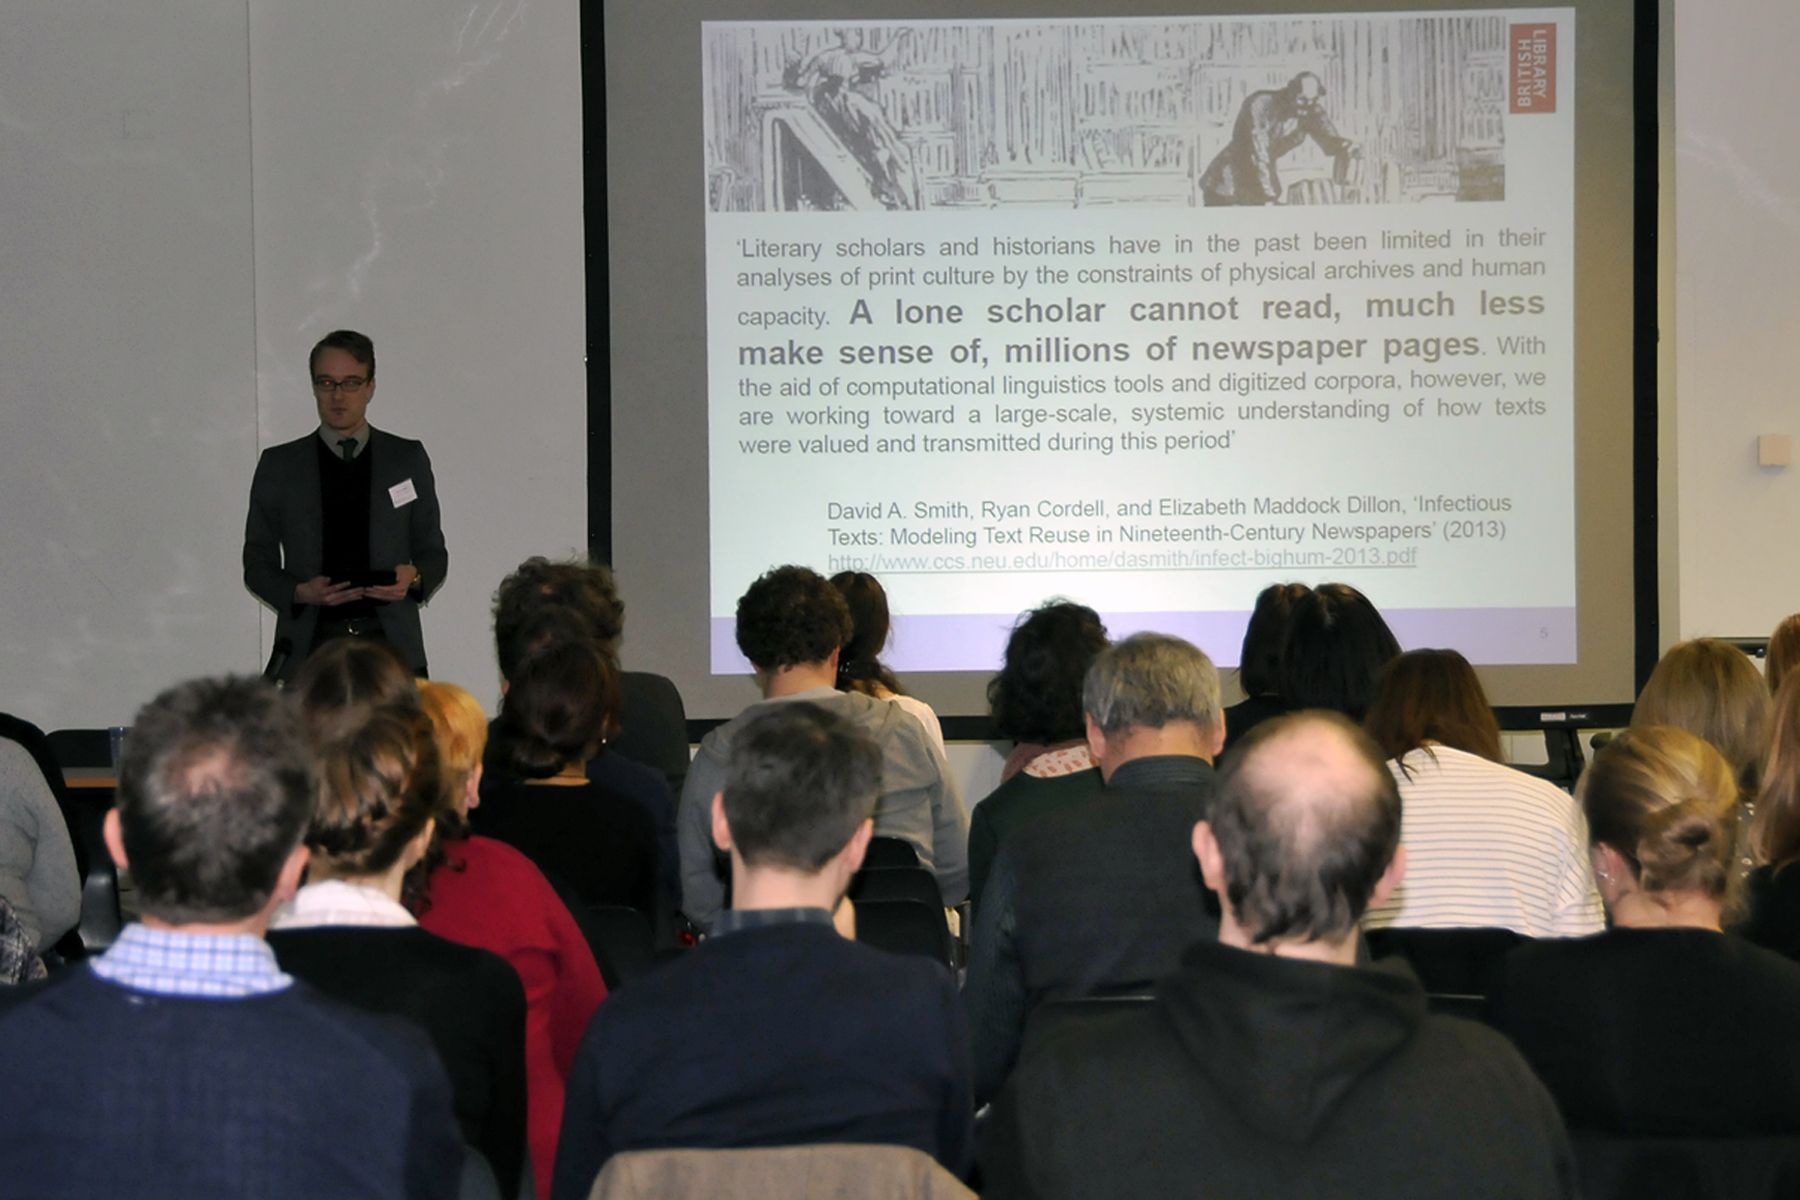 Dr James Baker of the British Library spoke about digital research on 18 March.